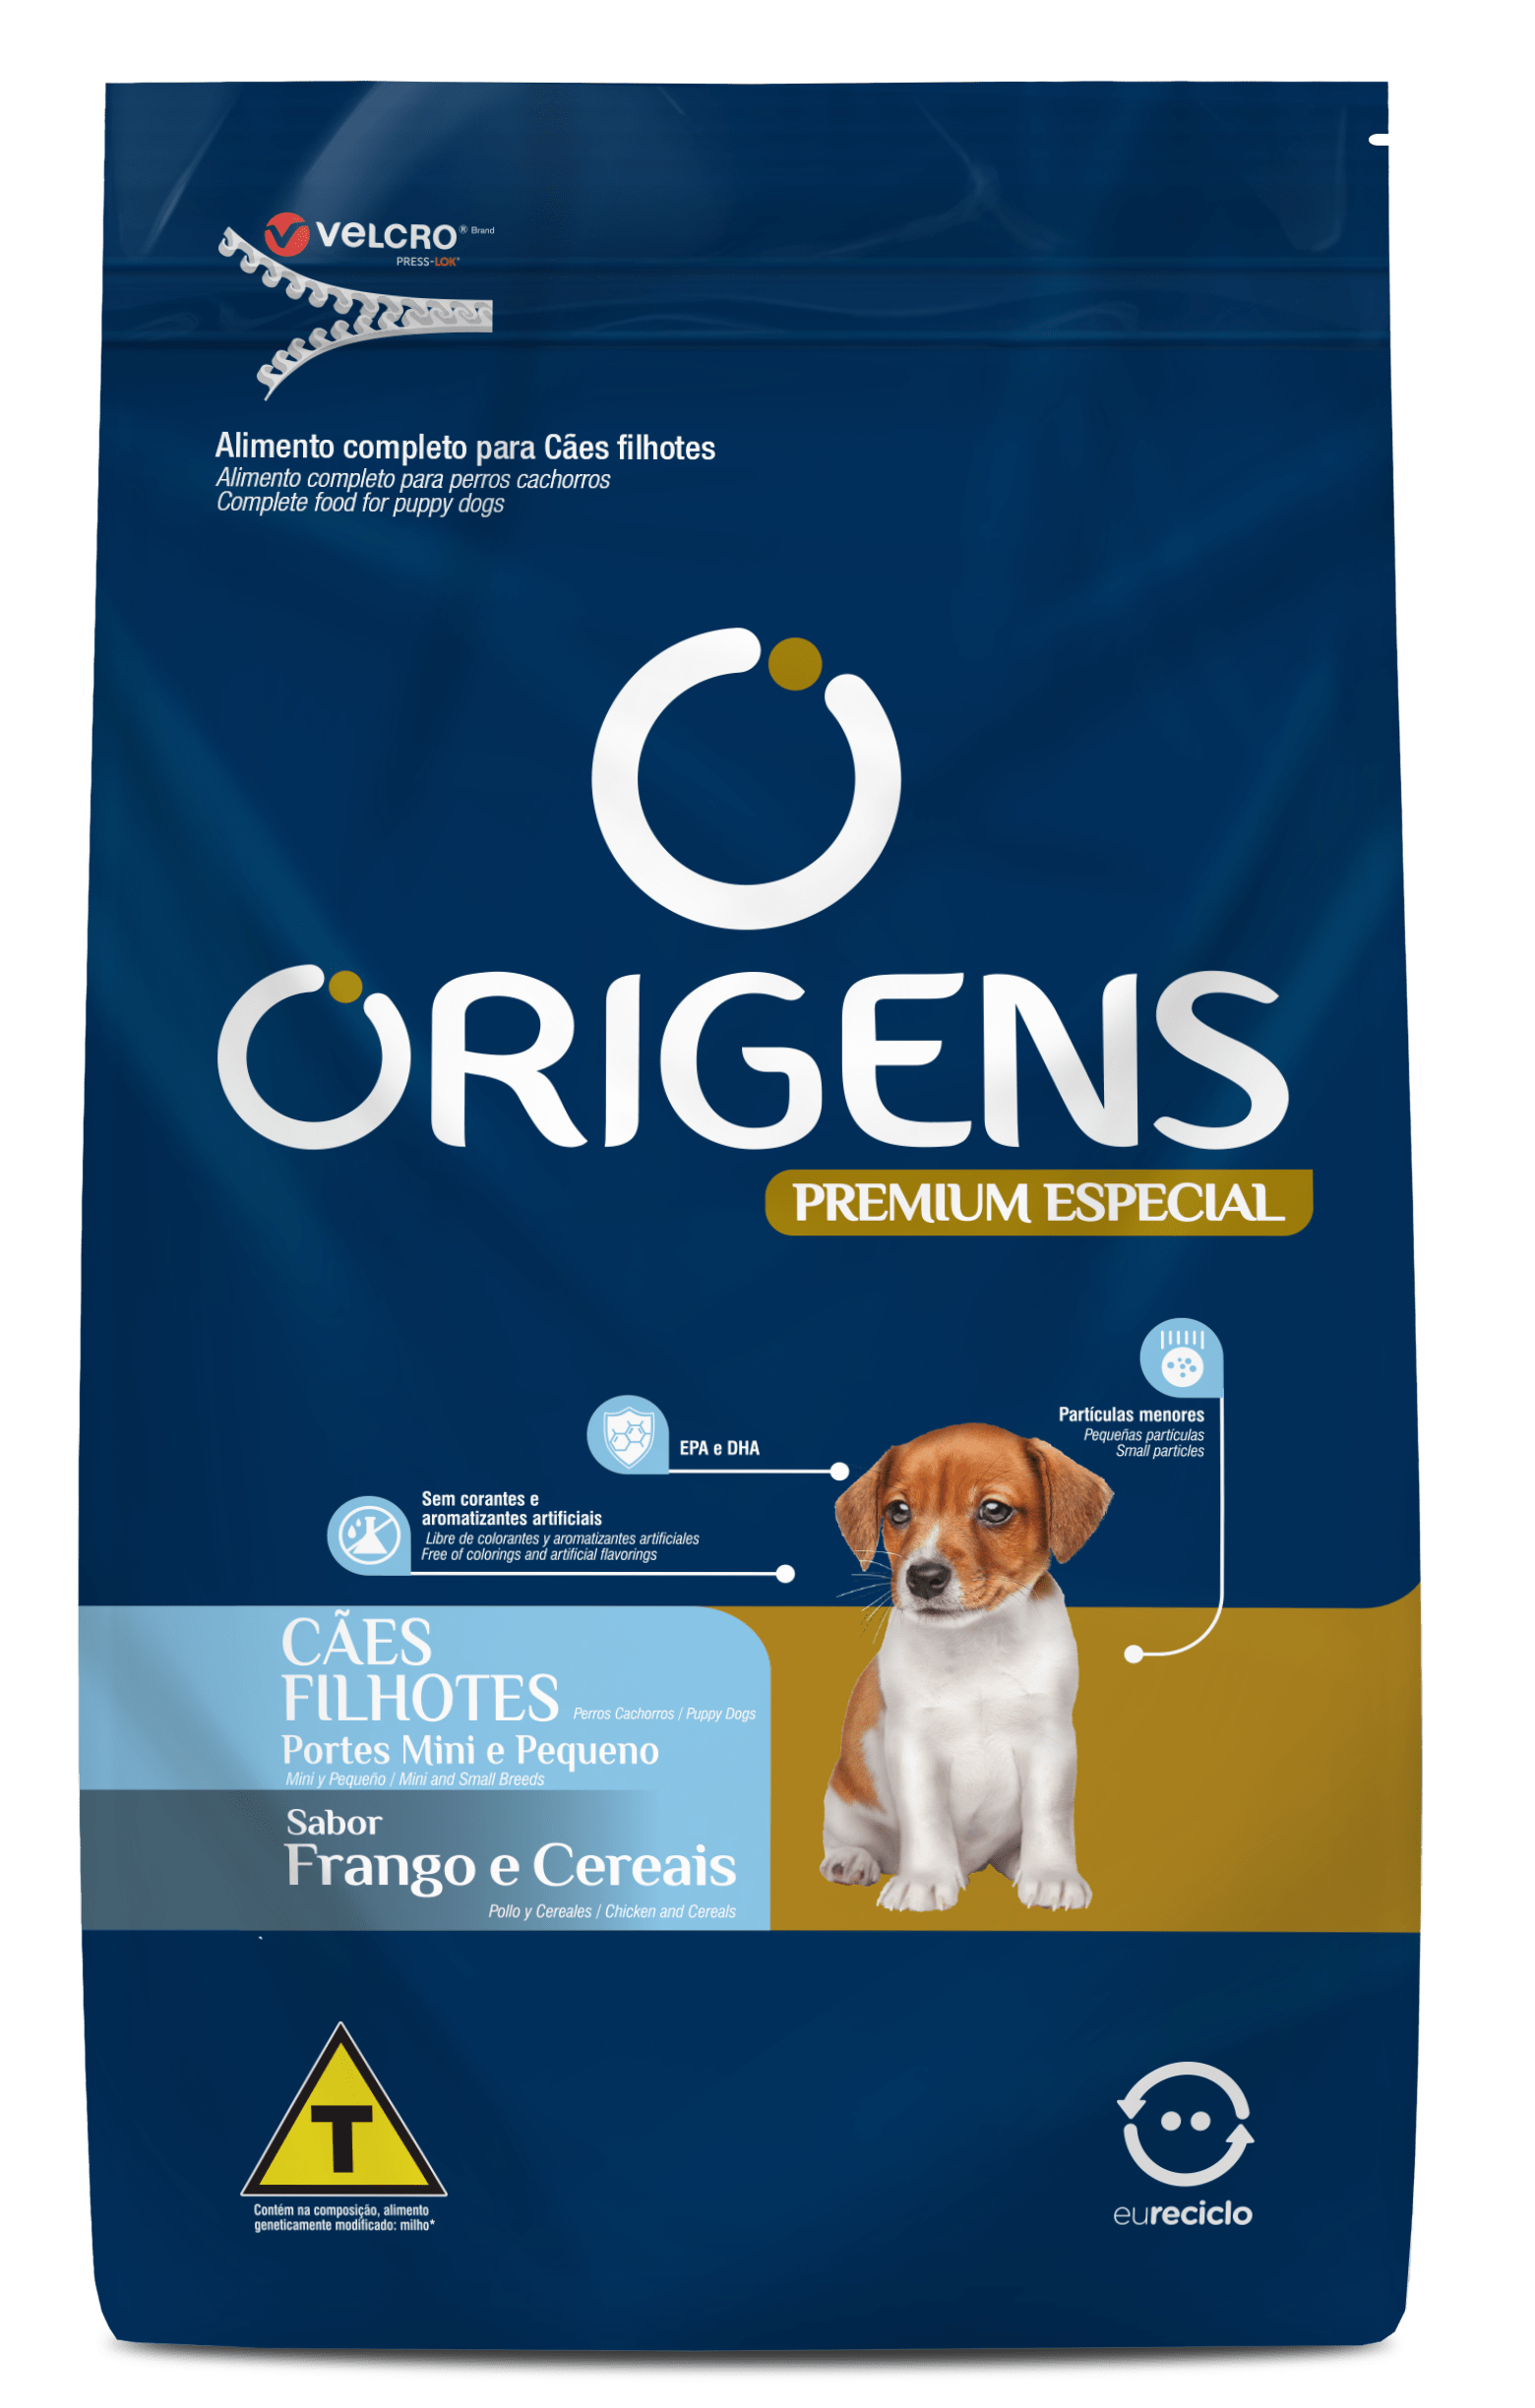 Origens Premium Especial Puppies Mini and Small Breed Chicken and Cereals flavor